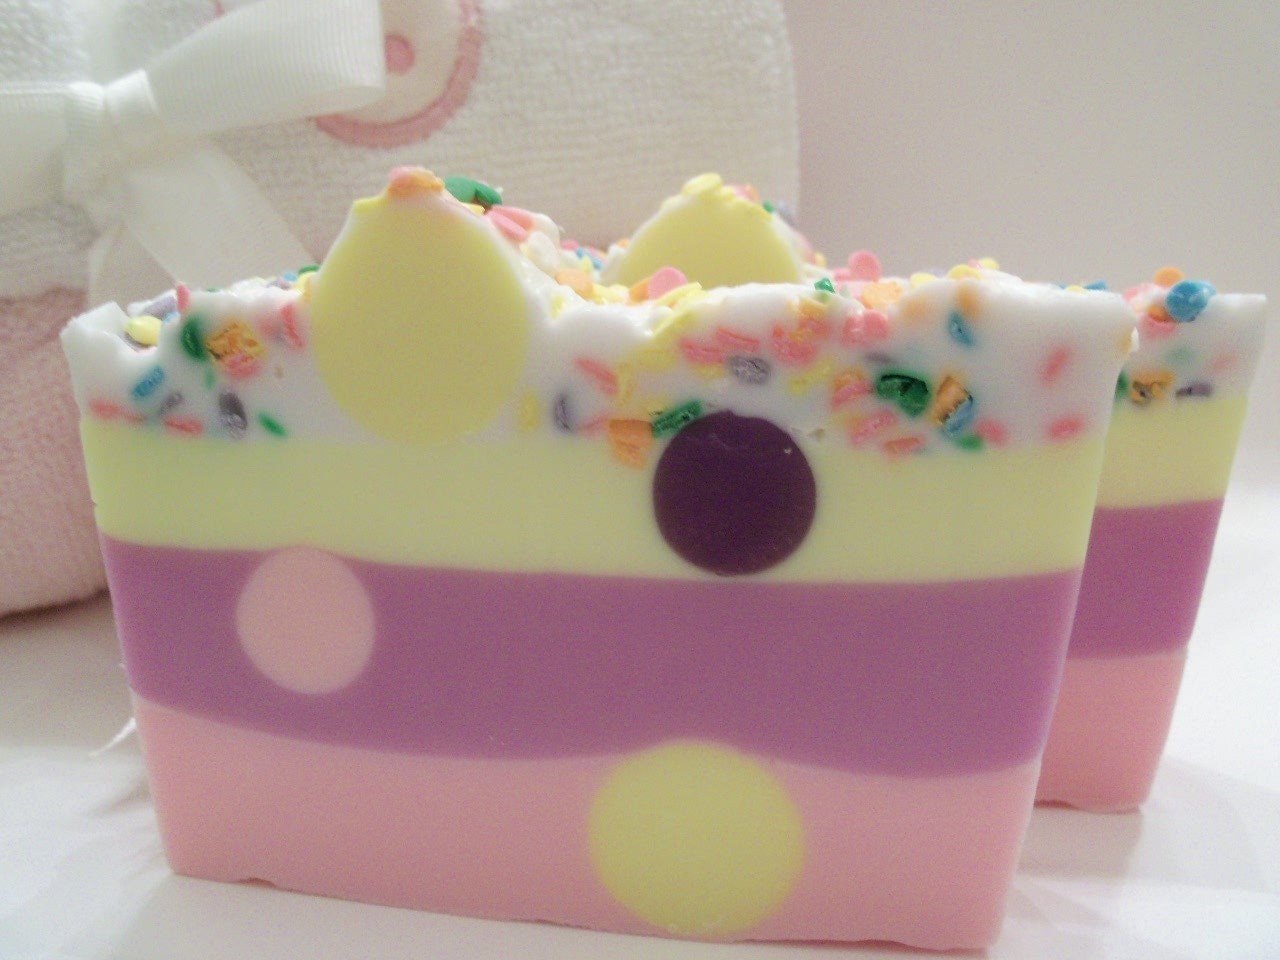 SALE - Pink Sugar Polka Dotted Soap  with a Candy Sprinkled Top